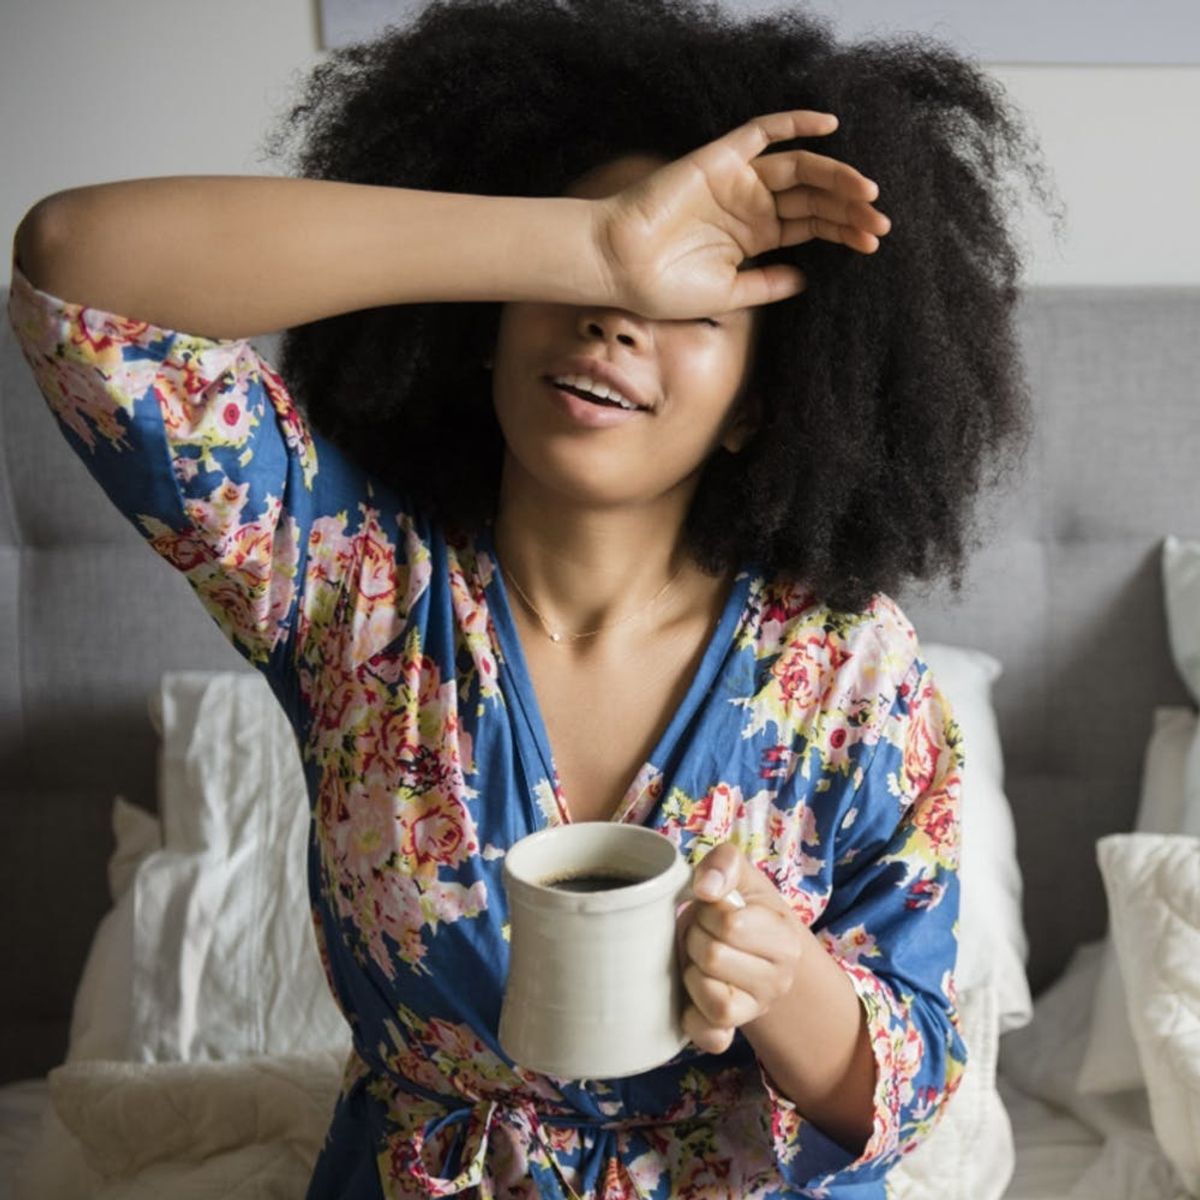 How Many Hours of Sleep You Need, According to Your Zodiac Sign